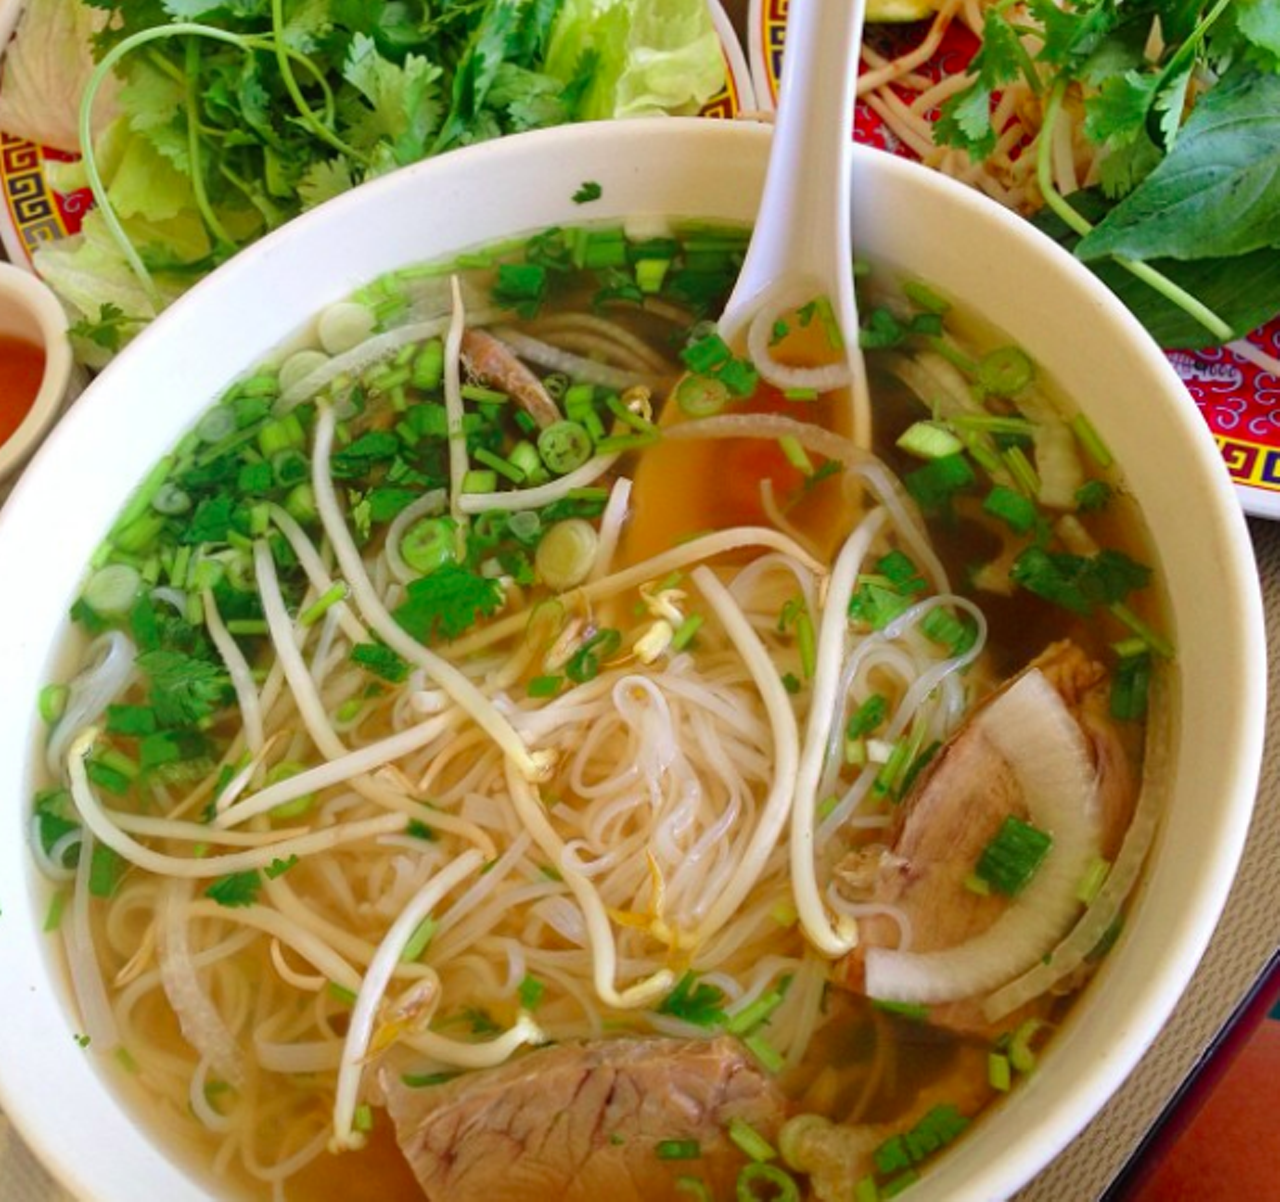 Pho Thien An
126 W Rector #108, (210) 348-8526
You know you can expect a solid bowl of pho when the first note under the menu is the spiciness scale. With meaty and veggie options alike to accompany the beef noodle broth, you’ll always want to opt for the large bowl.
Photo via Instagram / natasha_saree